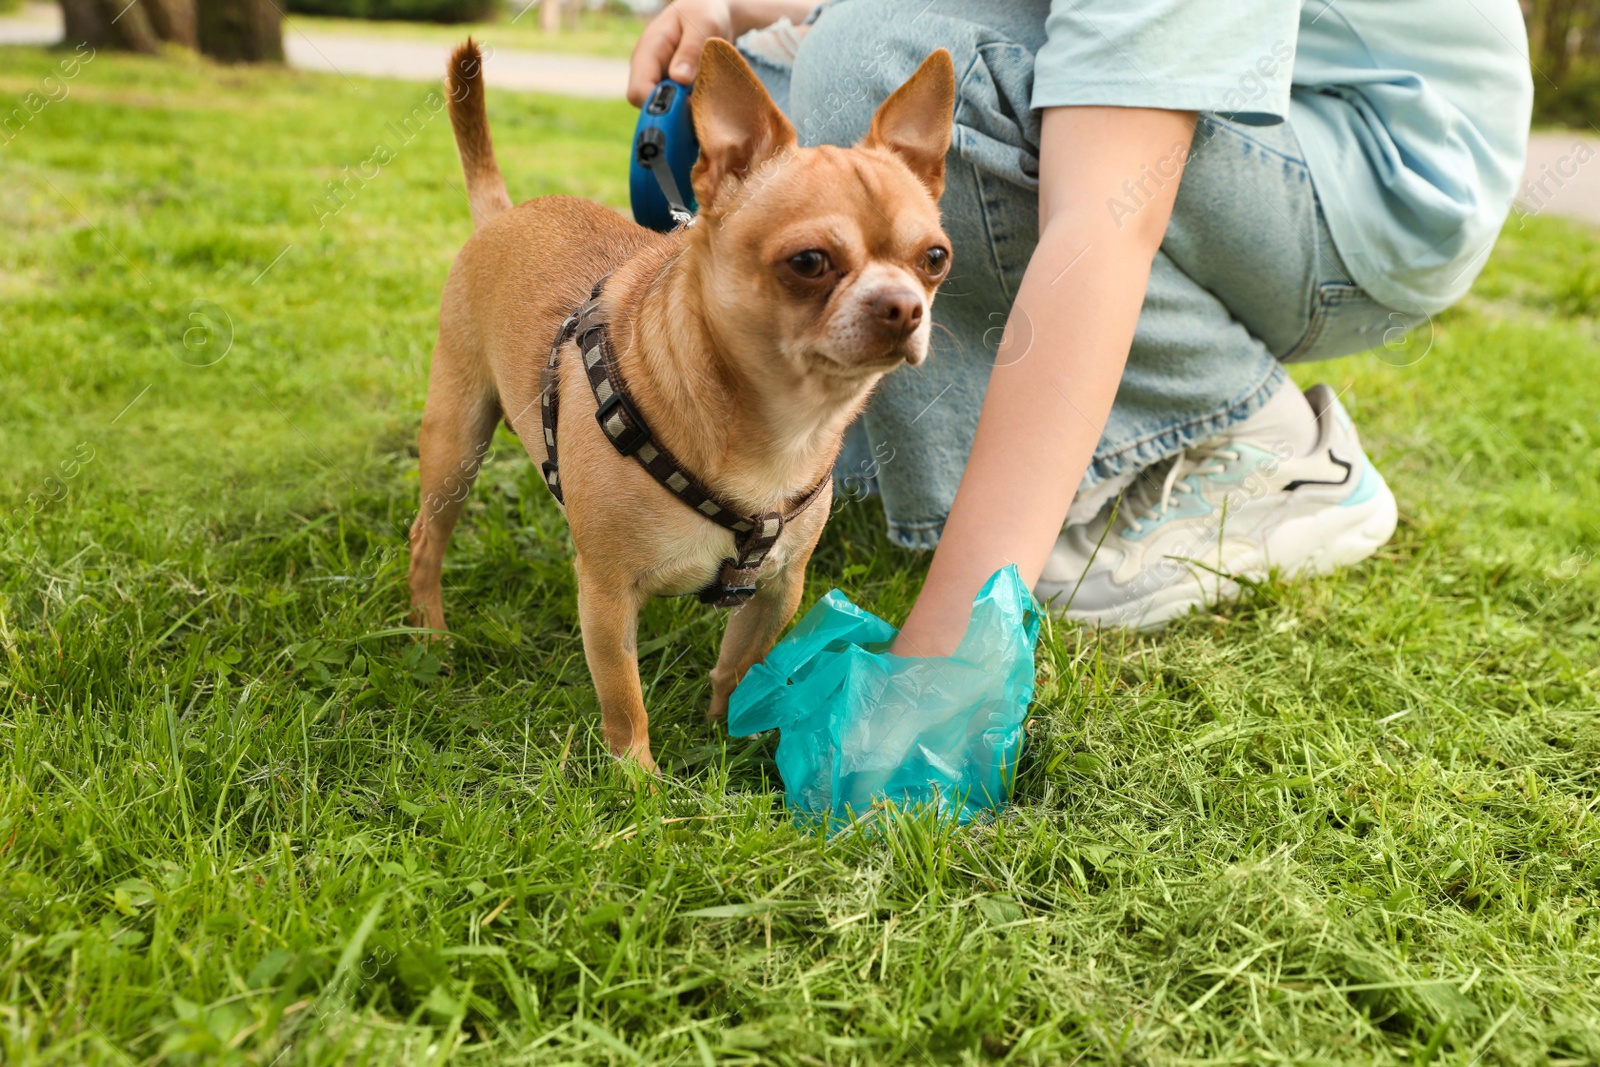 Photo of Woman picking up her dog's poop from green grass in park, closeup